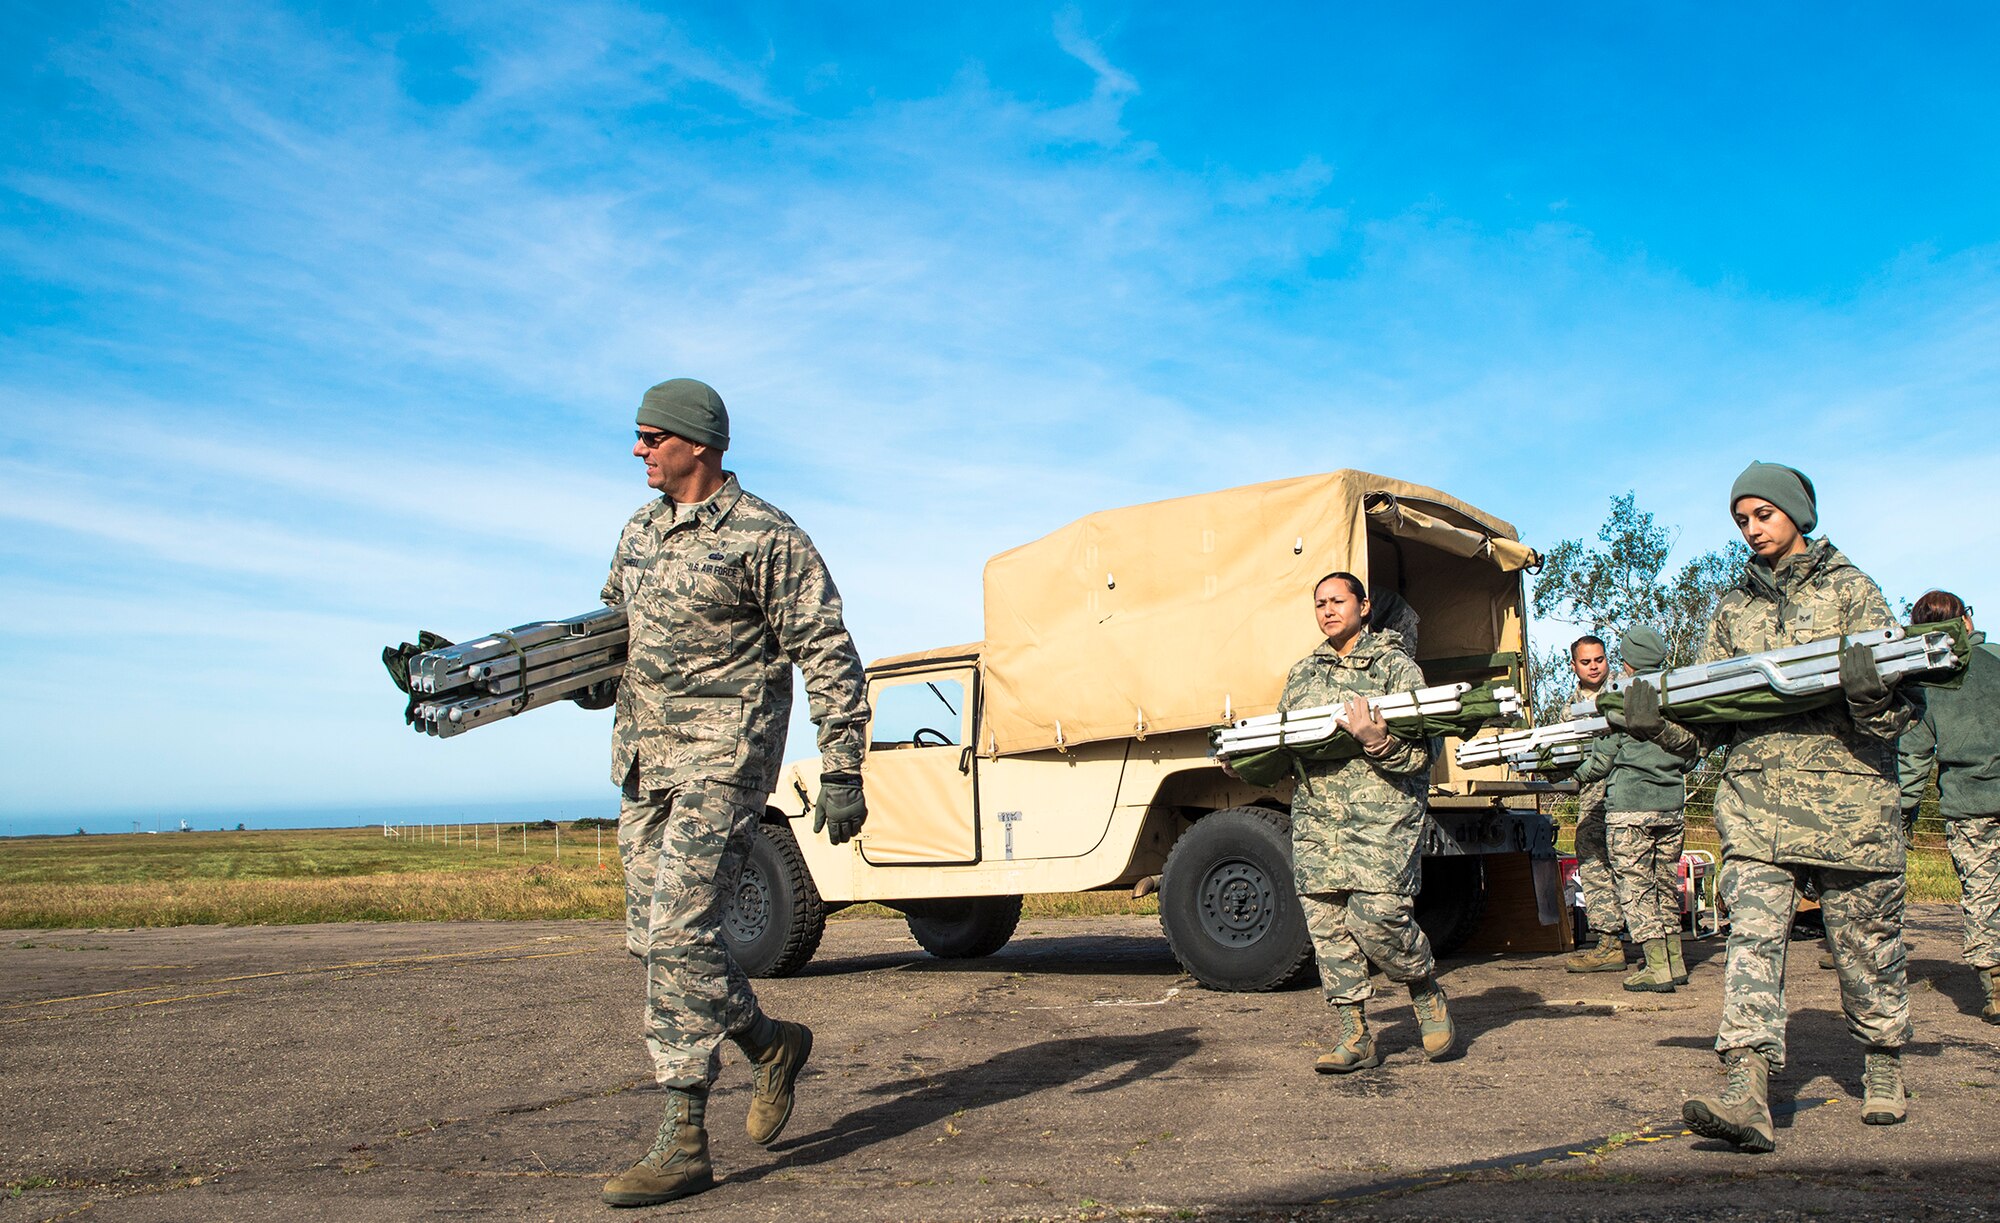 Airmen with the 433rd Medical Squadron haul litters from a Humvee in perperation for patients during exercise Patriot Hook April 27, 2017 at Vandenberg Air Force Base, California. Patriot Hook is an annual joint-service exercise coordinated by the Air Force Reserve, designed to integrate the military and first responders of federal, state and local agencies by providing training to mobilize quickly and deploy in military aircraft in the event of a regional emergency or natural disaster. (U.S. Air Force photo by Benjamin Faske)